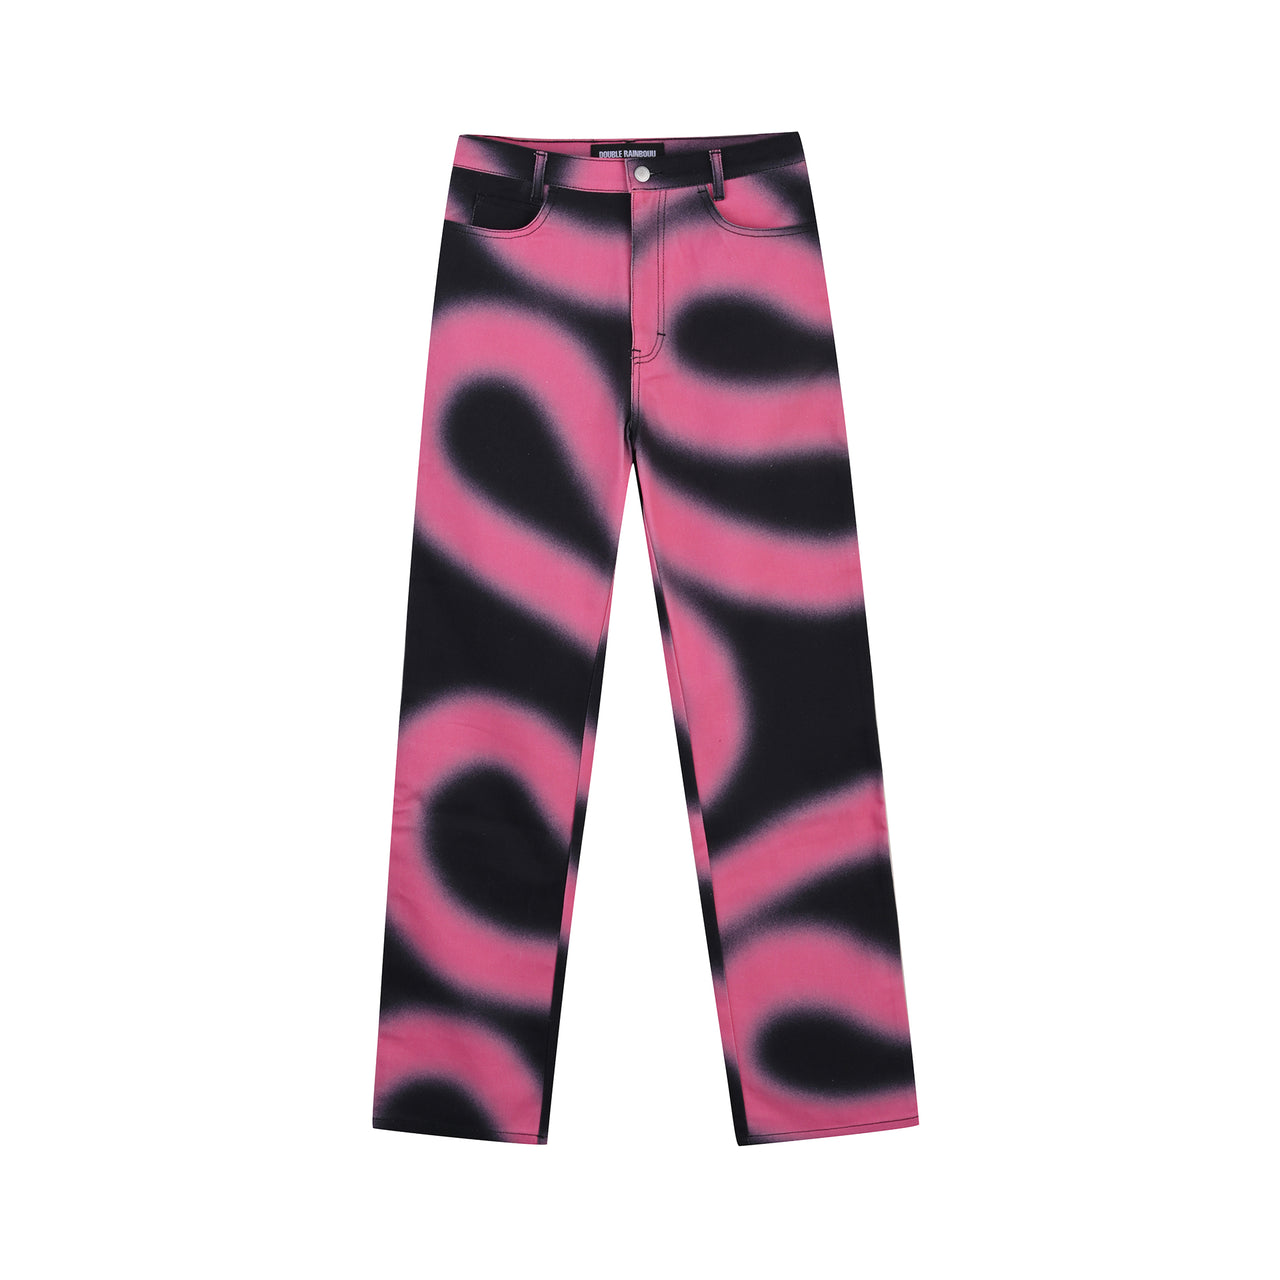 AMNESIA PINK PARTY PANTS